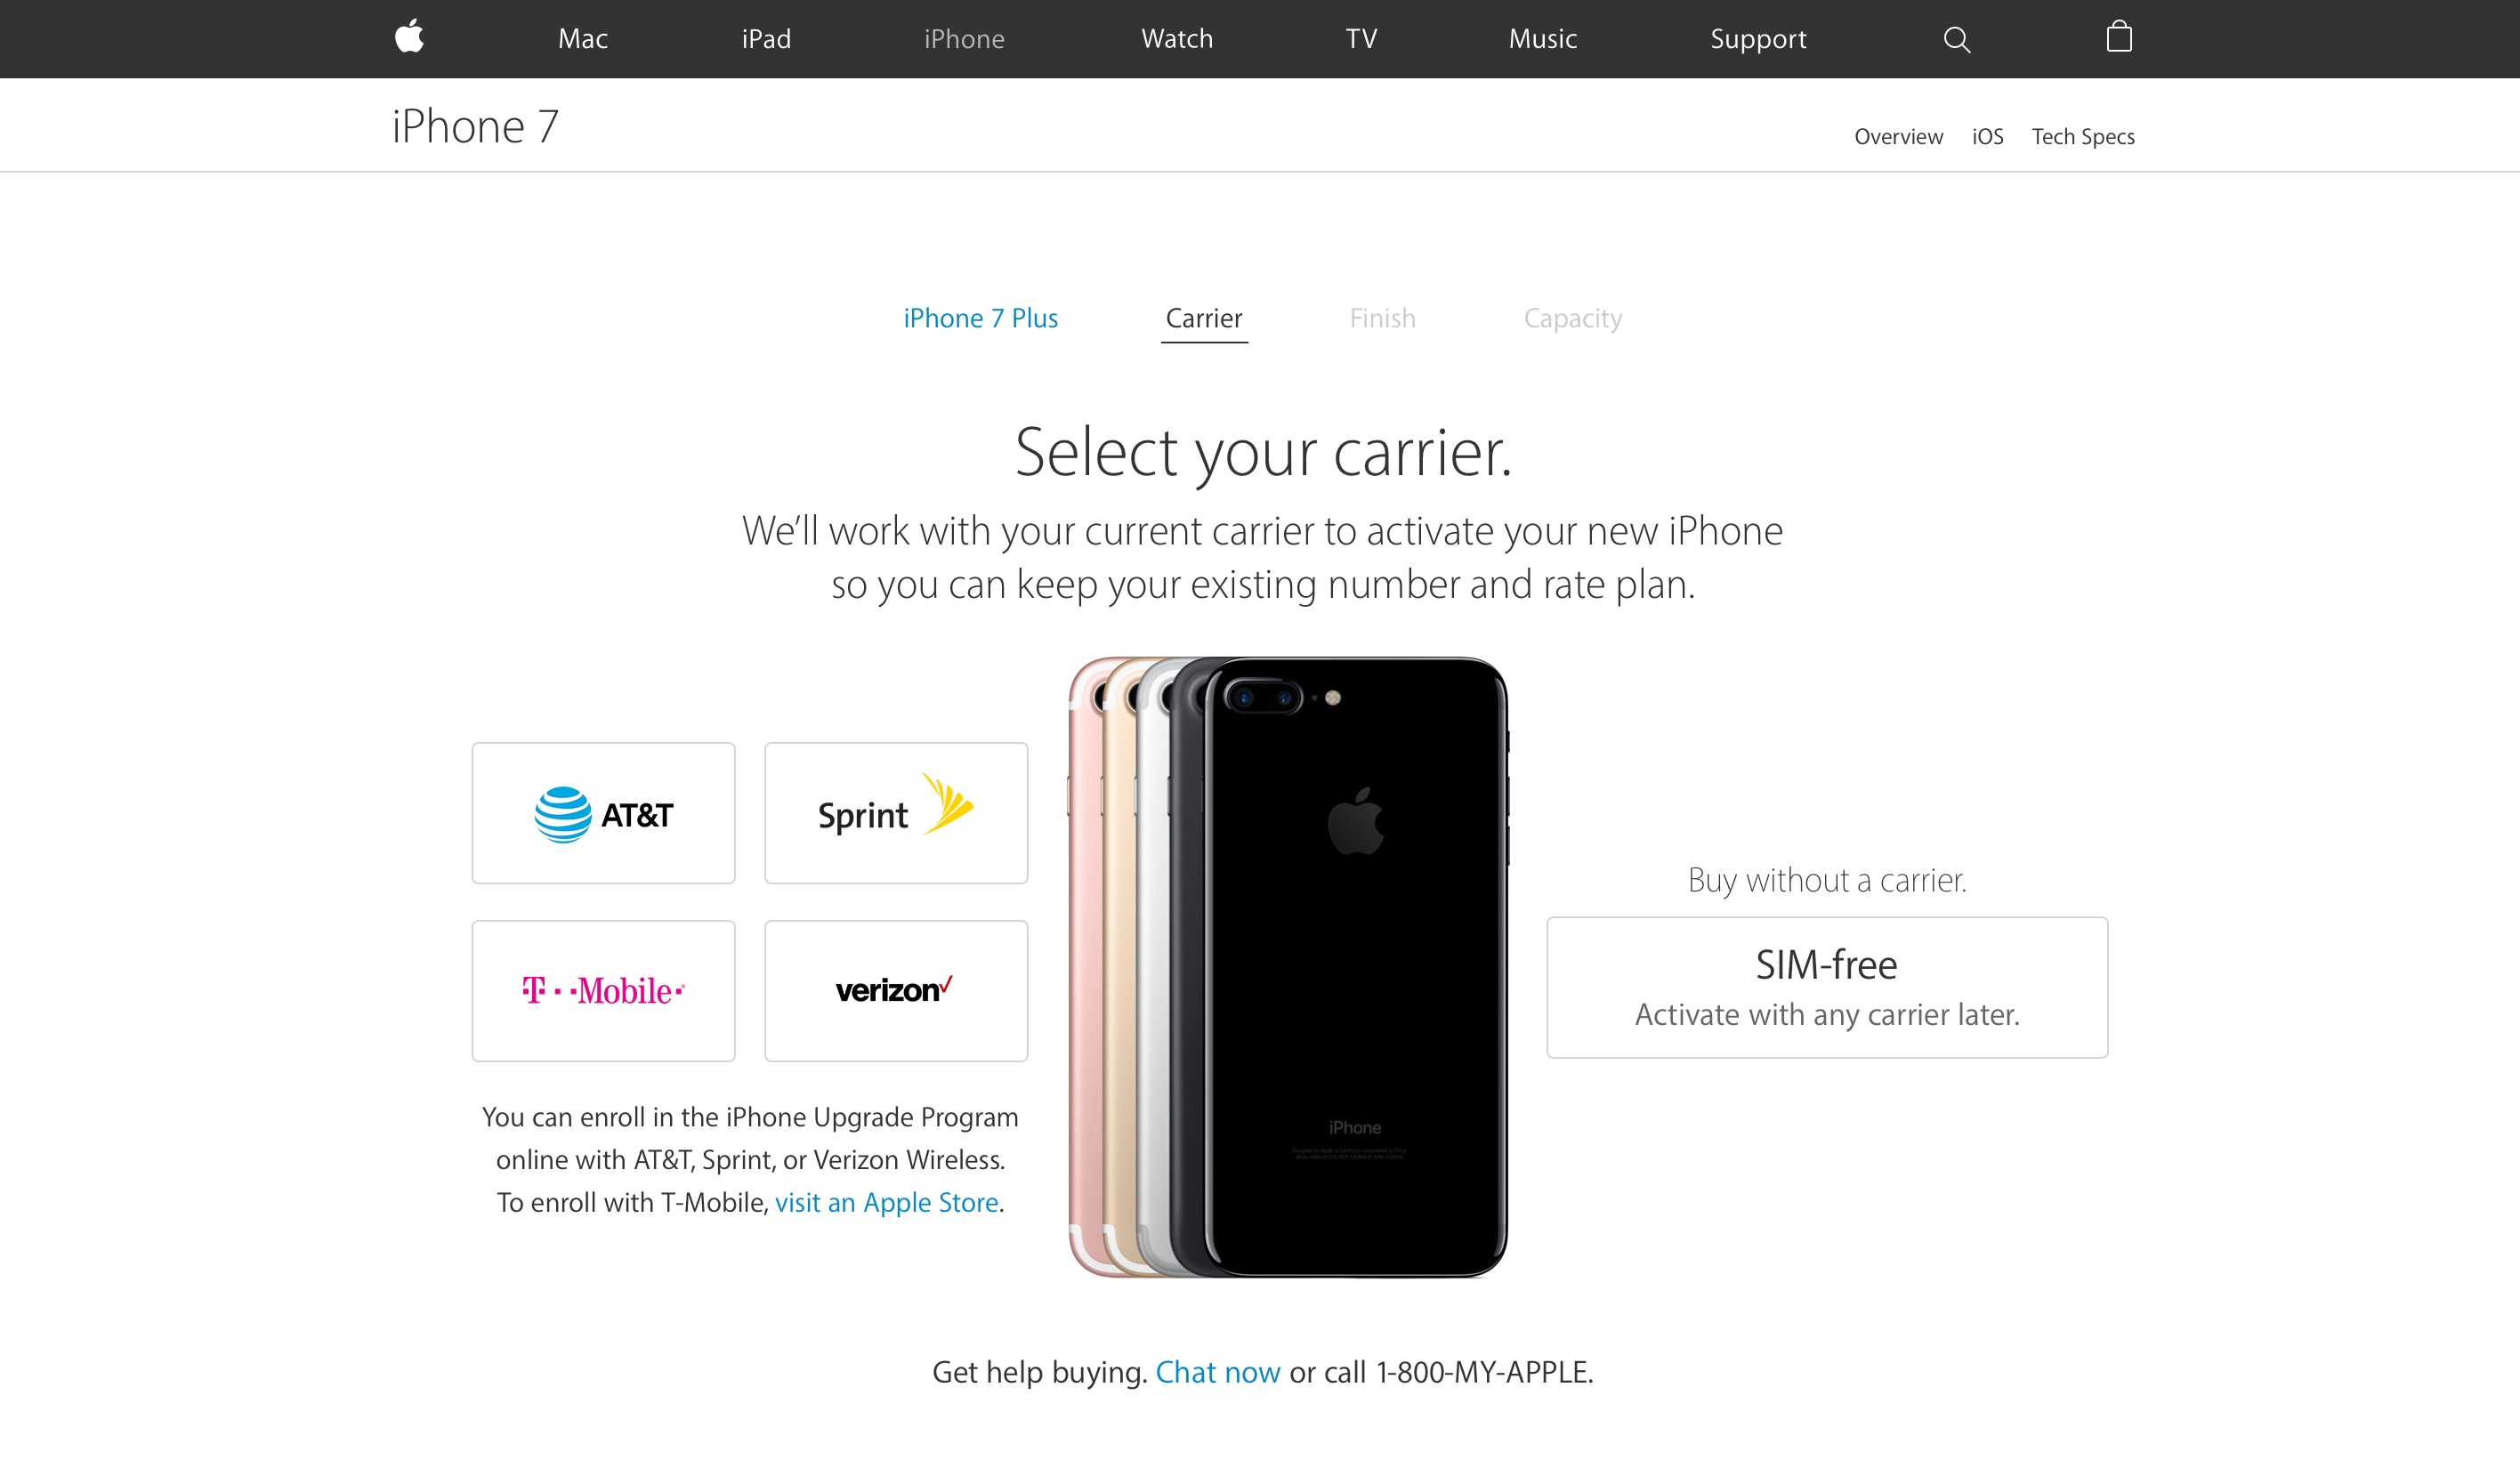 Unlocked iPhones for sale on Apple's online store